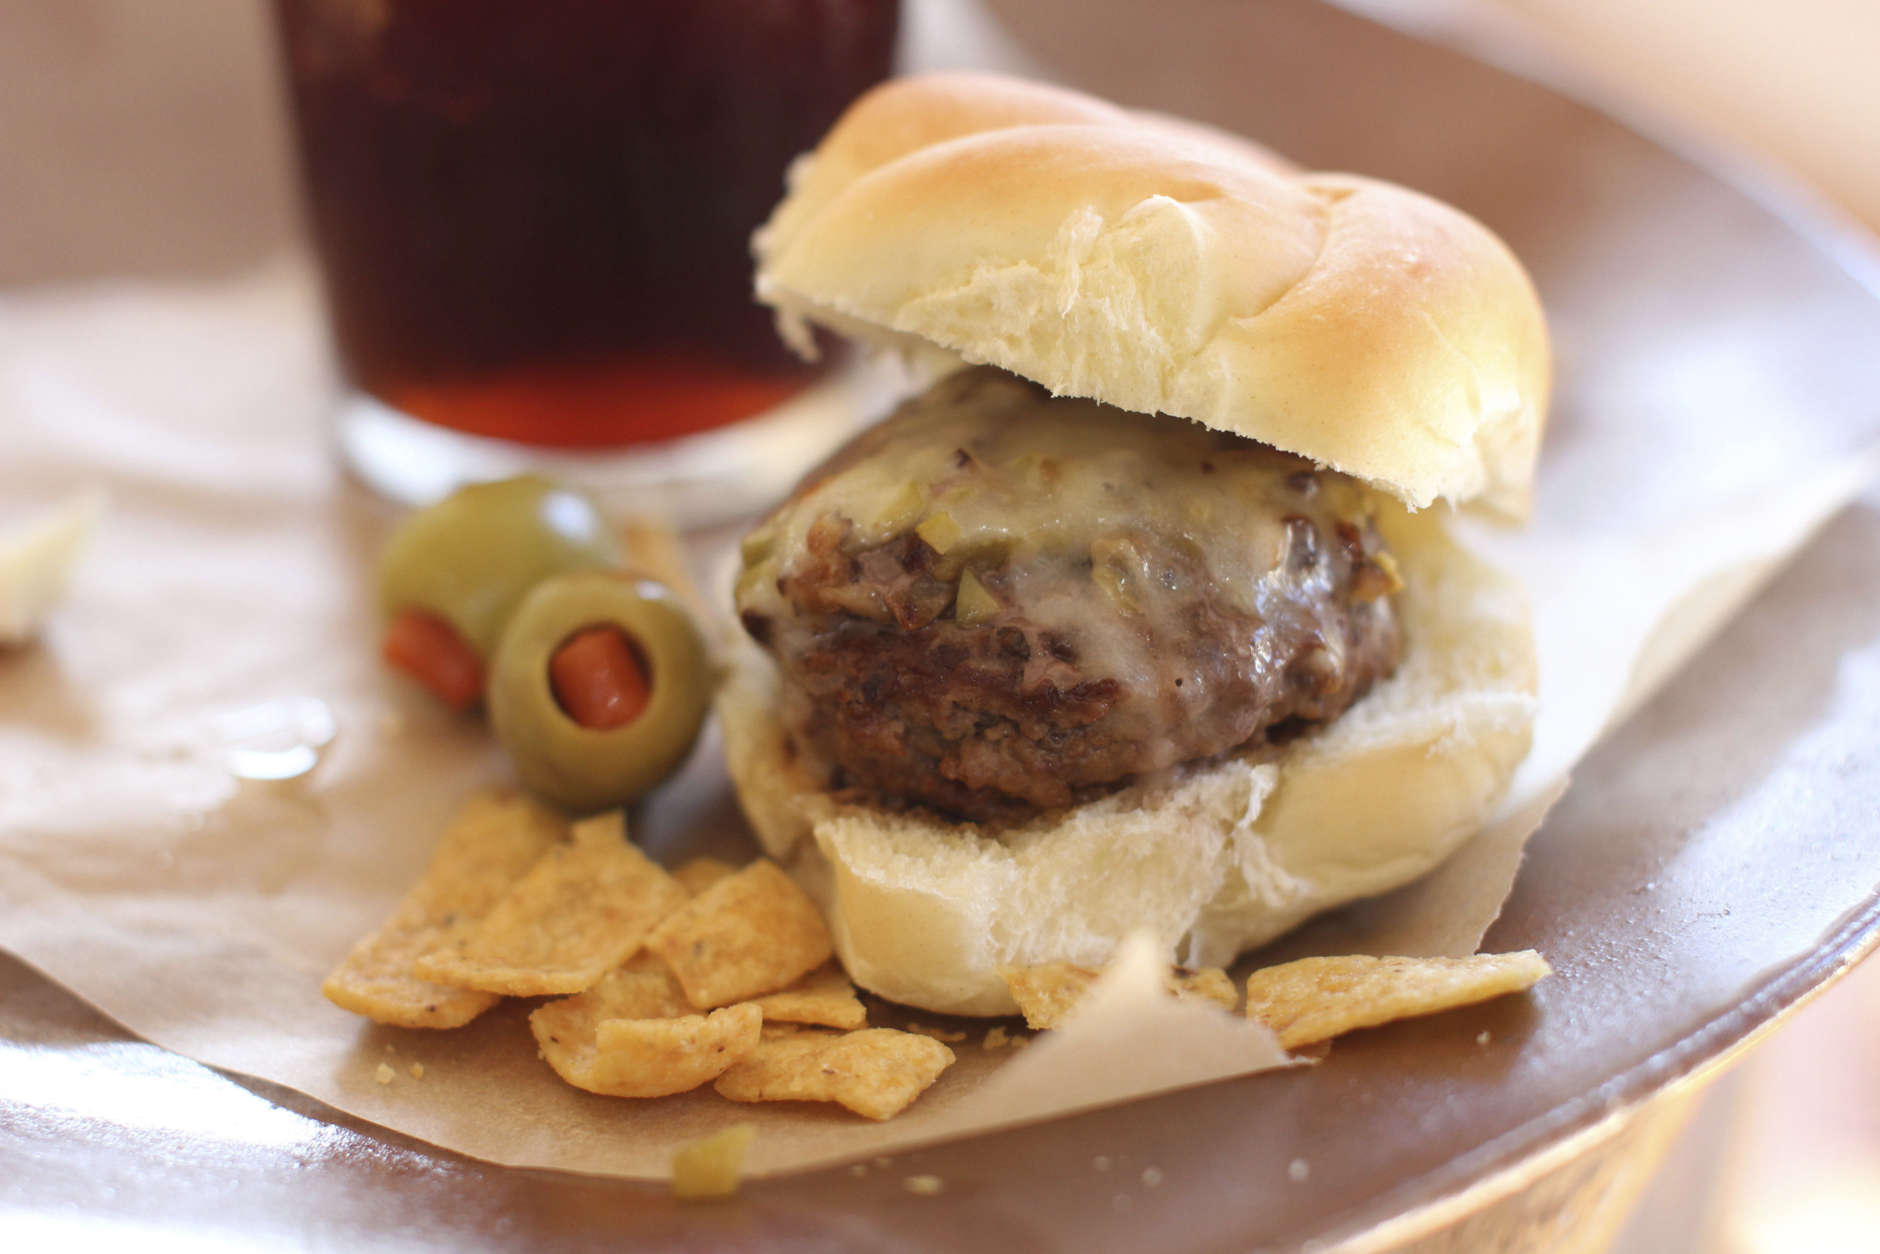 FILE-This Nov. 16, 2015 photo shows beer steamed cheese and mushroom beef sliders in Concord, N.H. This dish is from a recipe by Sara Moulton. (AP Photo/Matthew Mead)